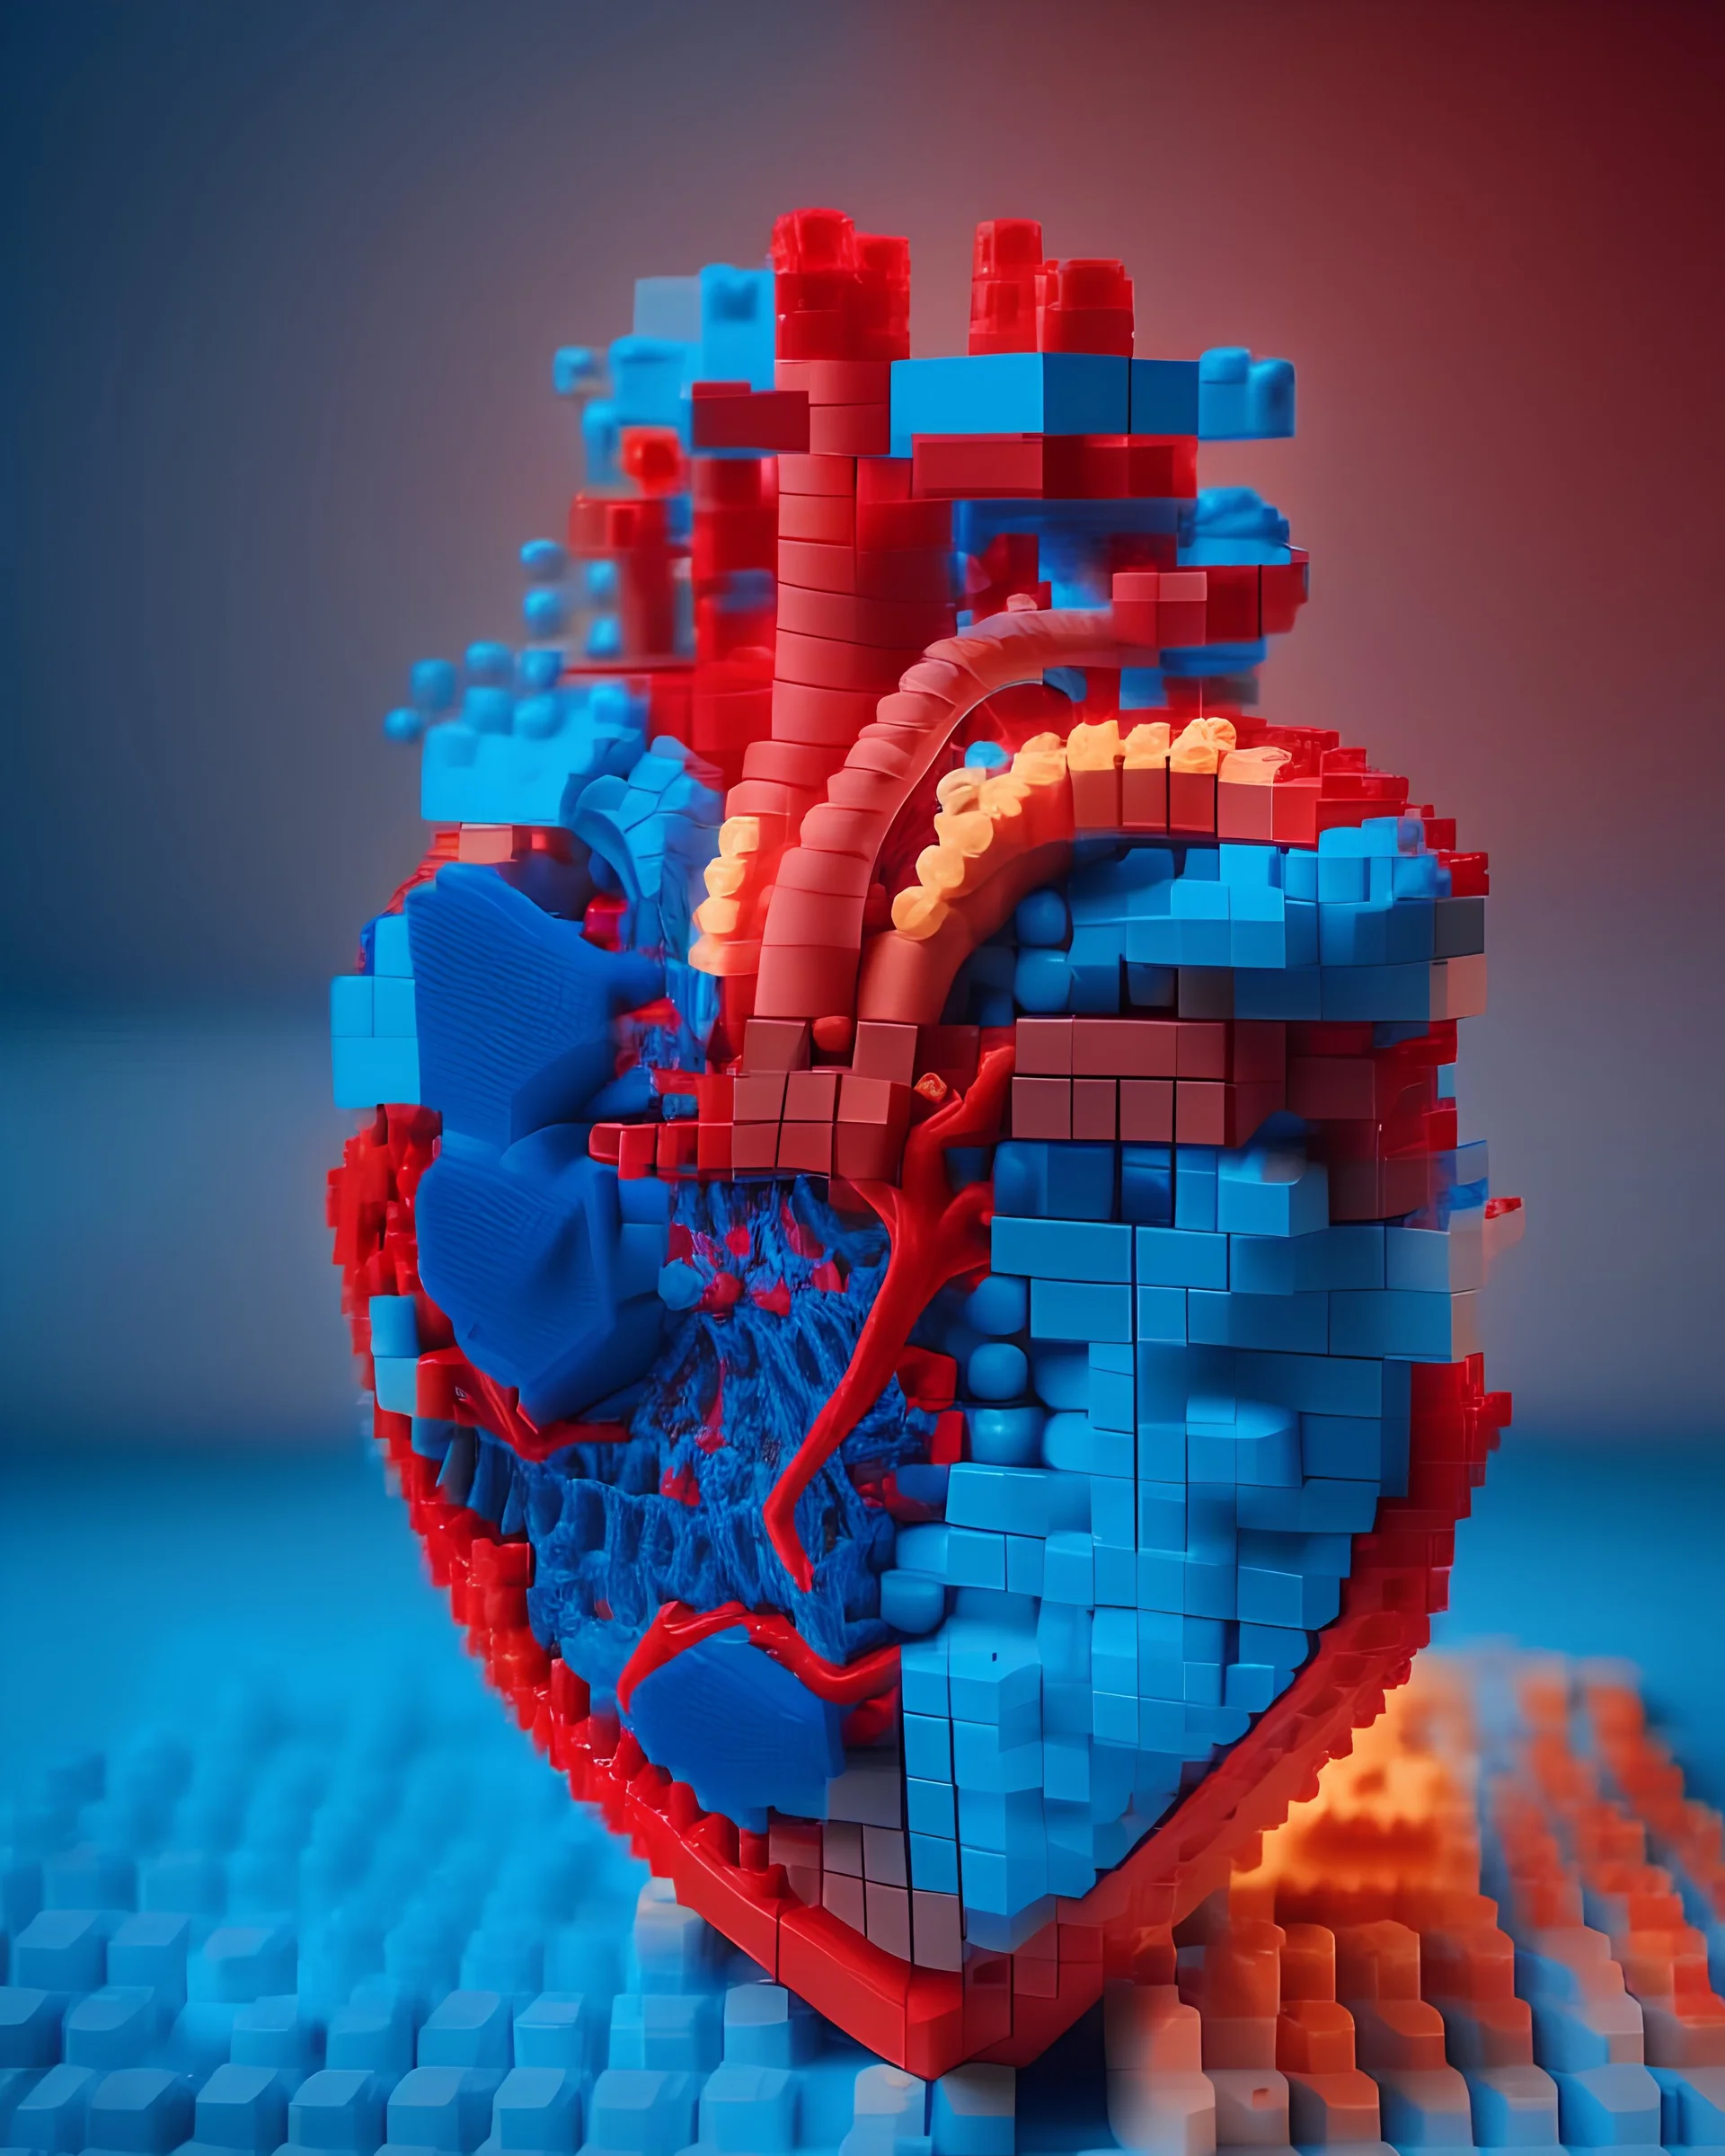 the anatomy of a human heart made of Lego pieces bricks, soft pastel red blue colors,space, cinematic lights